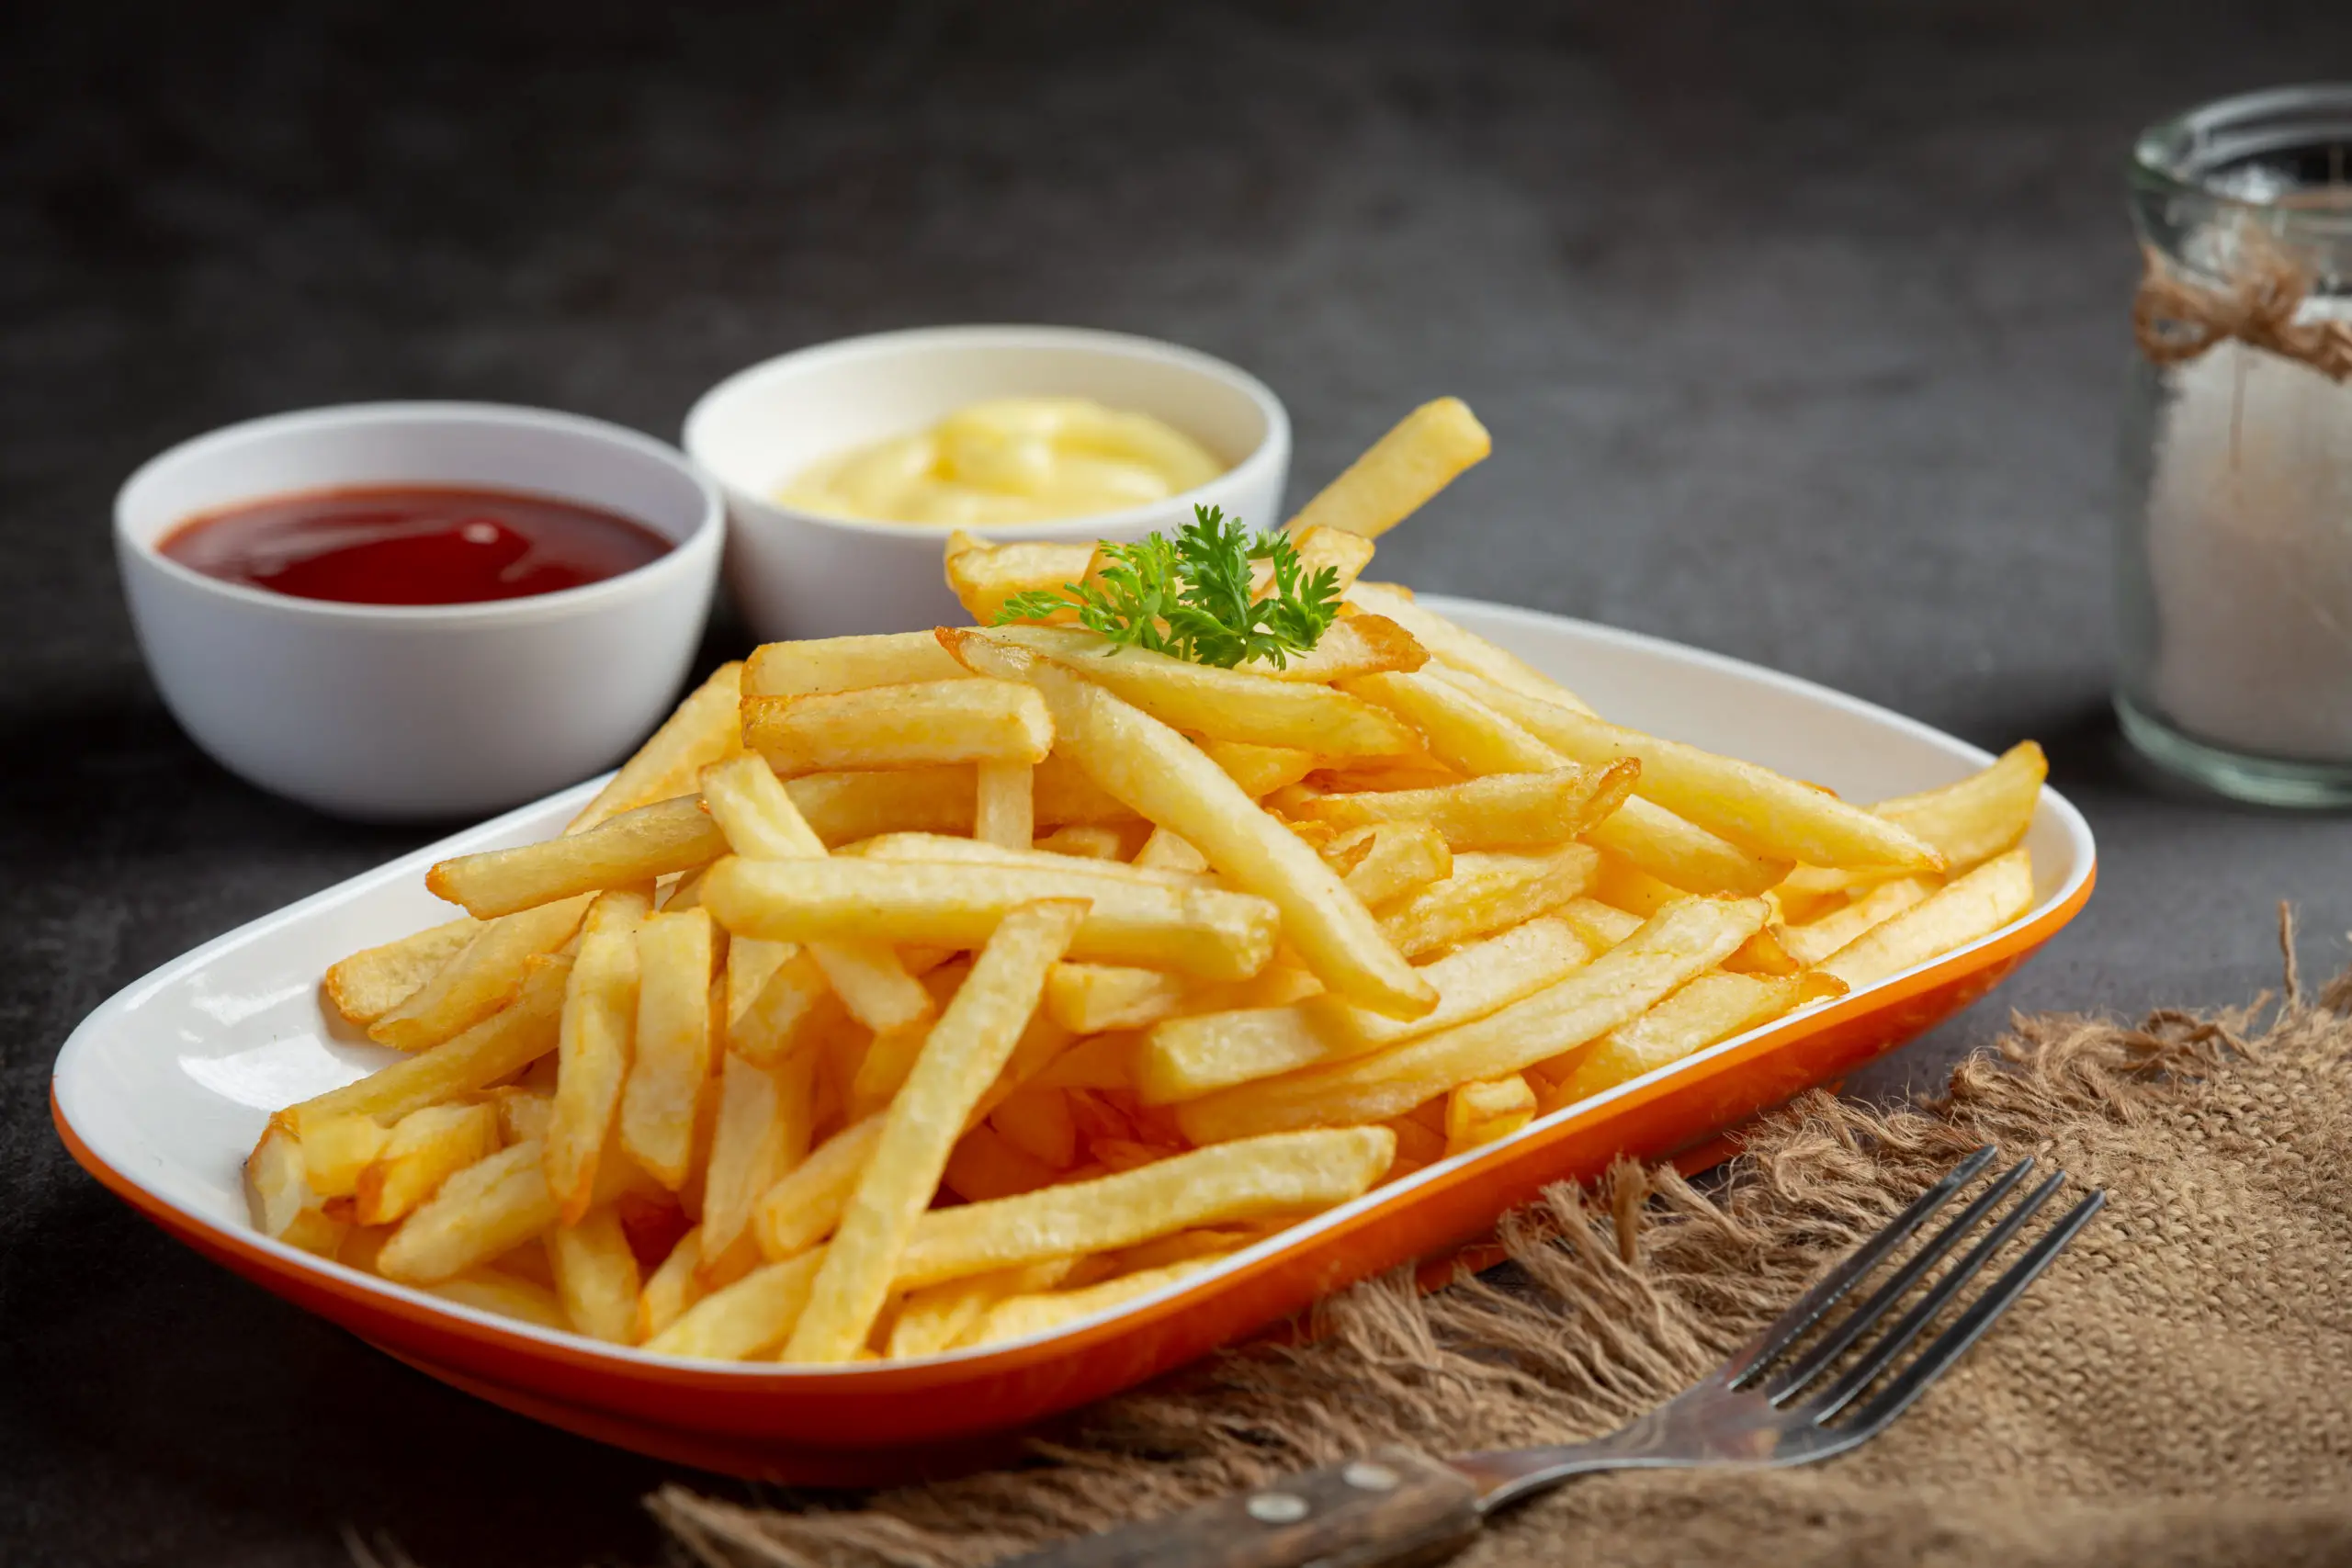 Are french fries vegan? – from fast food to homemade fries